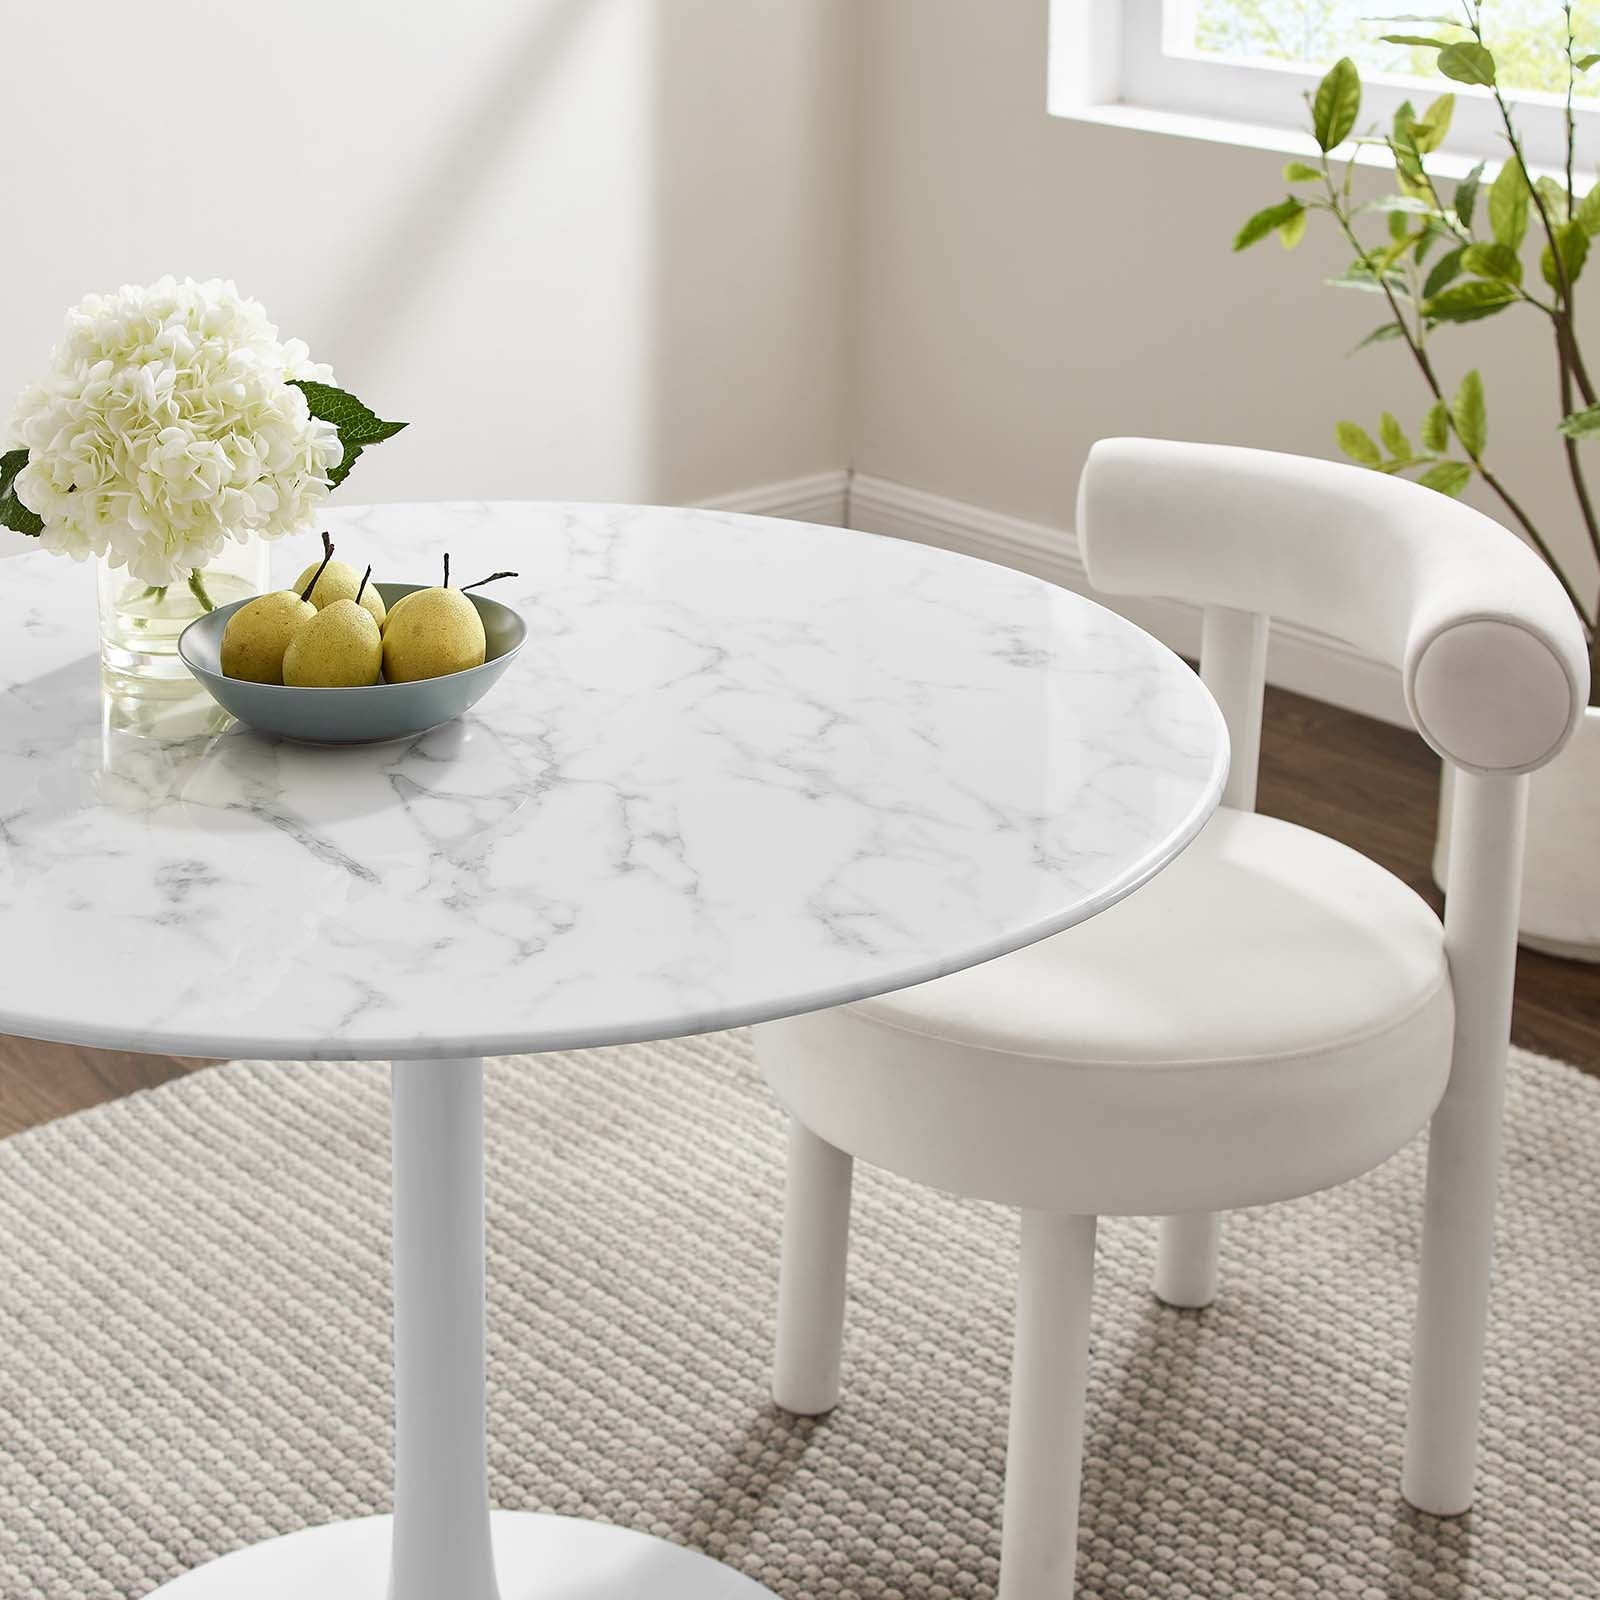 Lippa 40" Round Artificial Marble Dining Table - East Shore Modern Home Furnishings